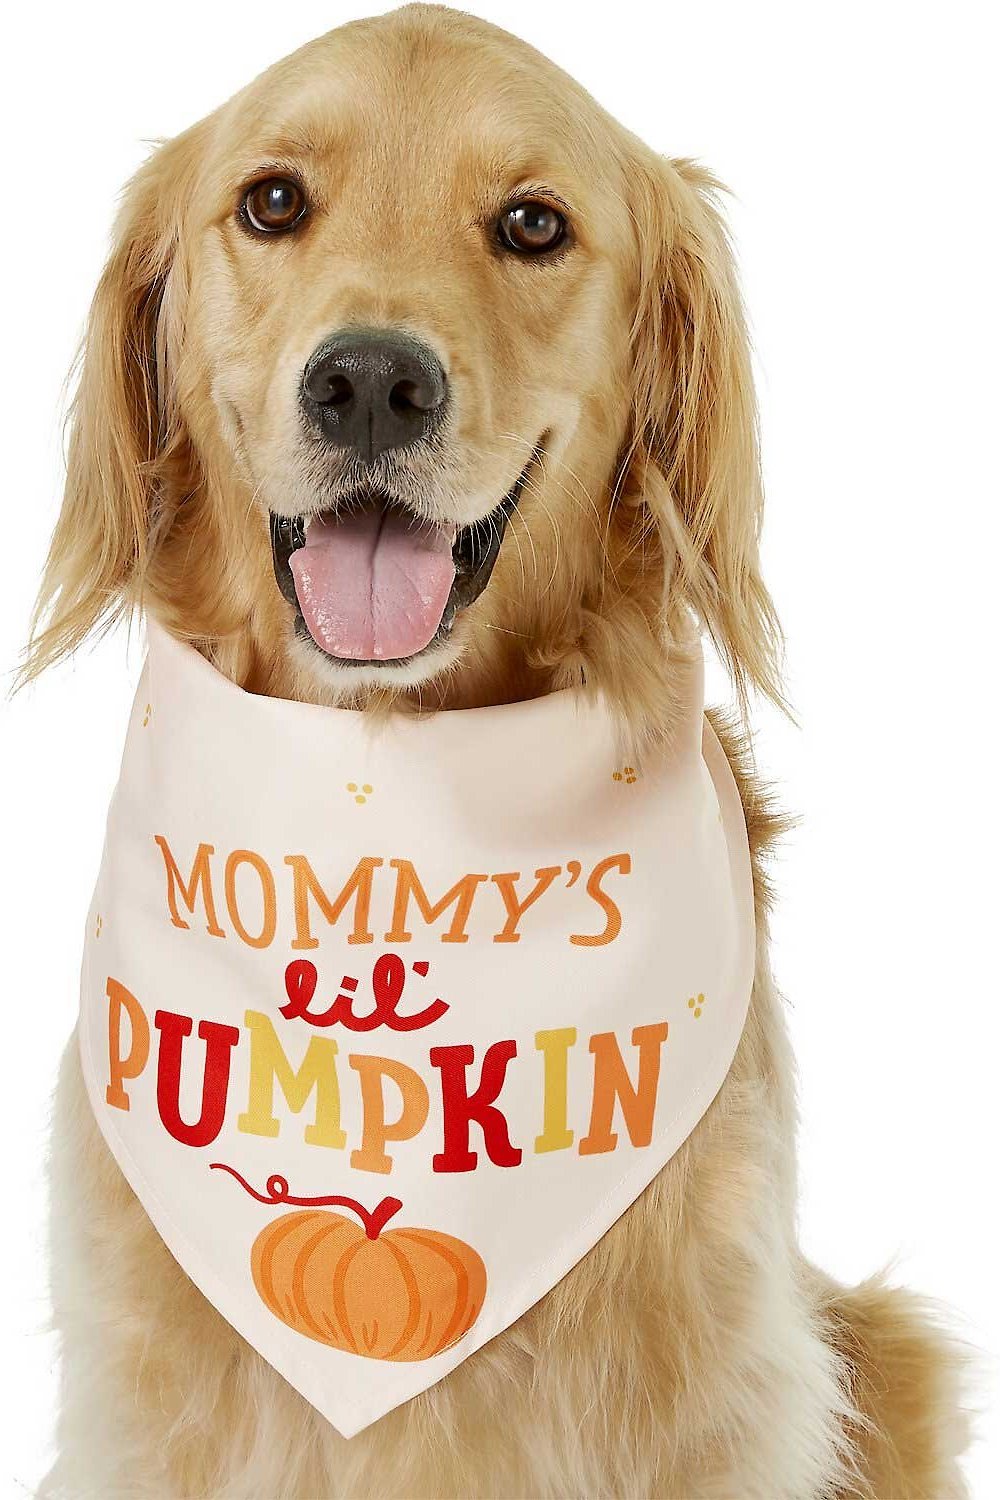 Dog Costumes: The 22 Best Options For Halloween 2022 - DodoWell - The Dodo